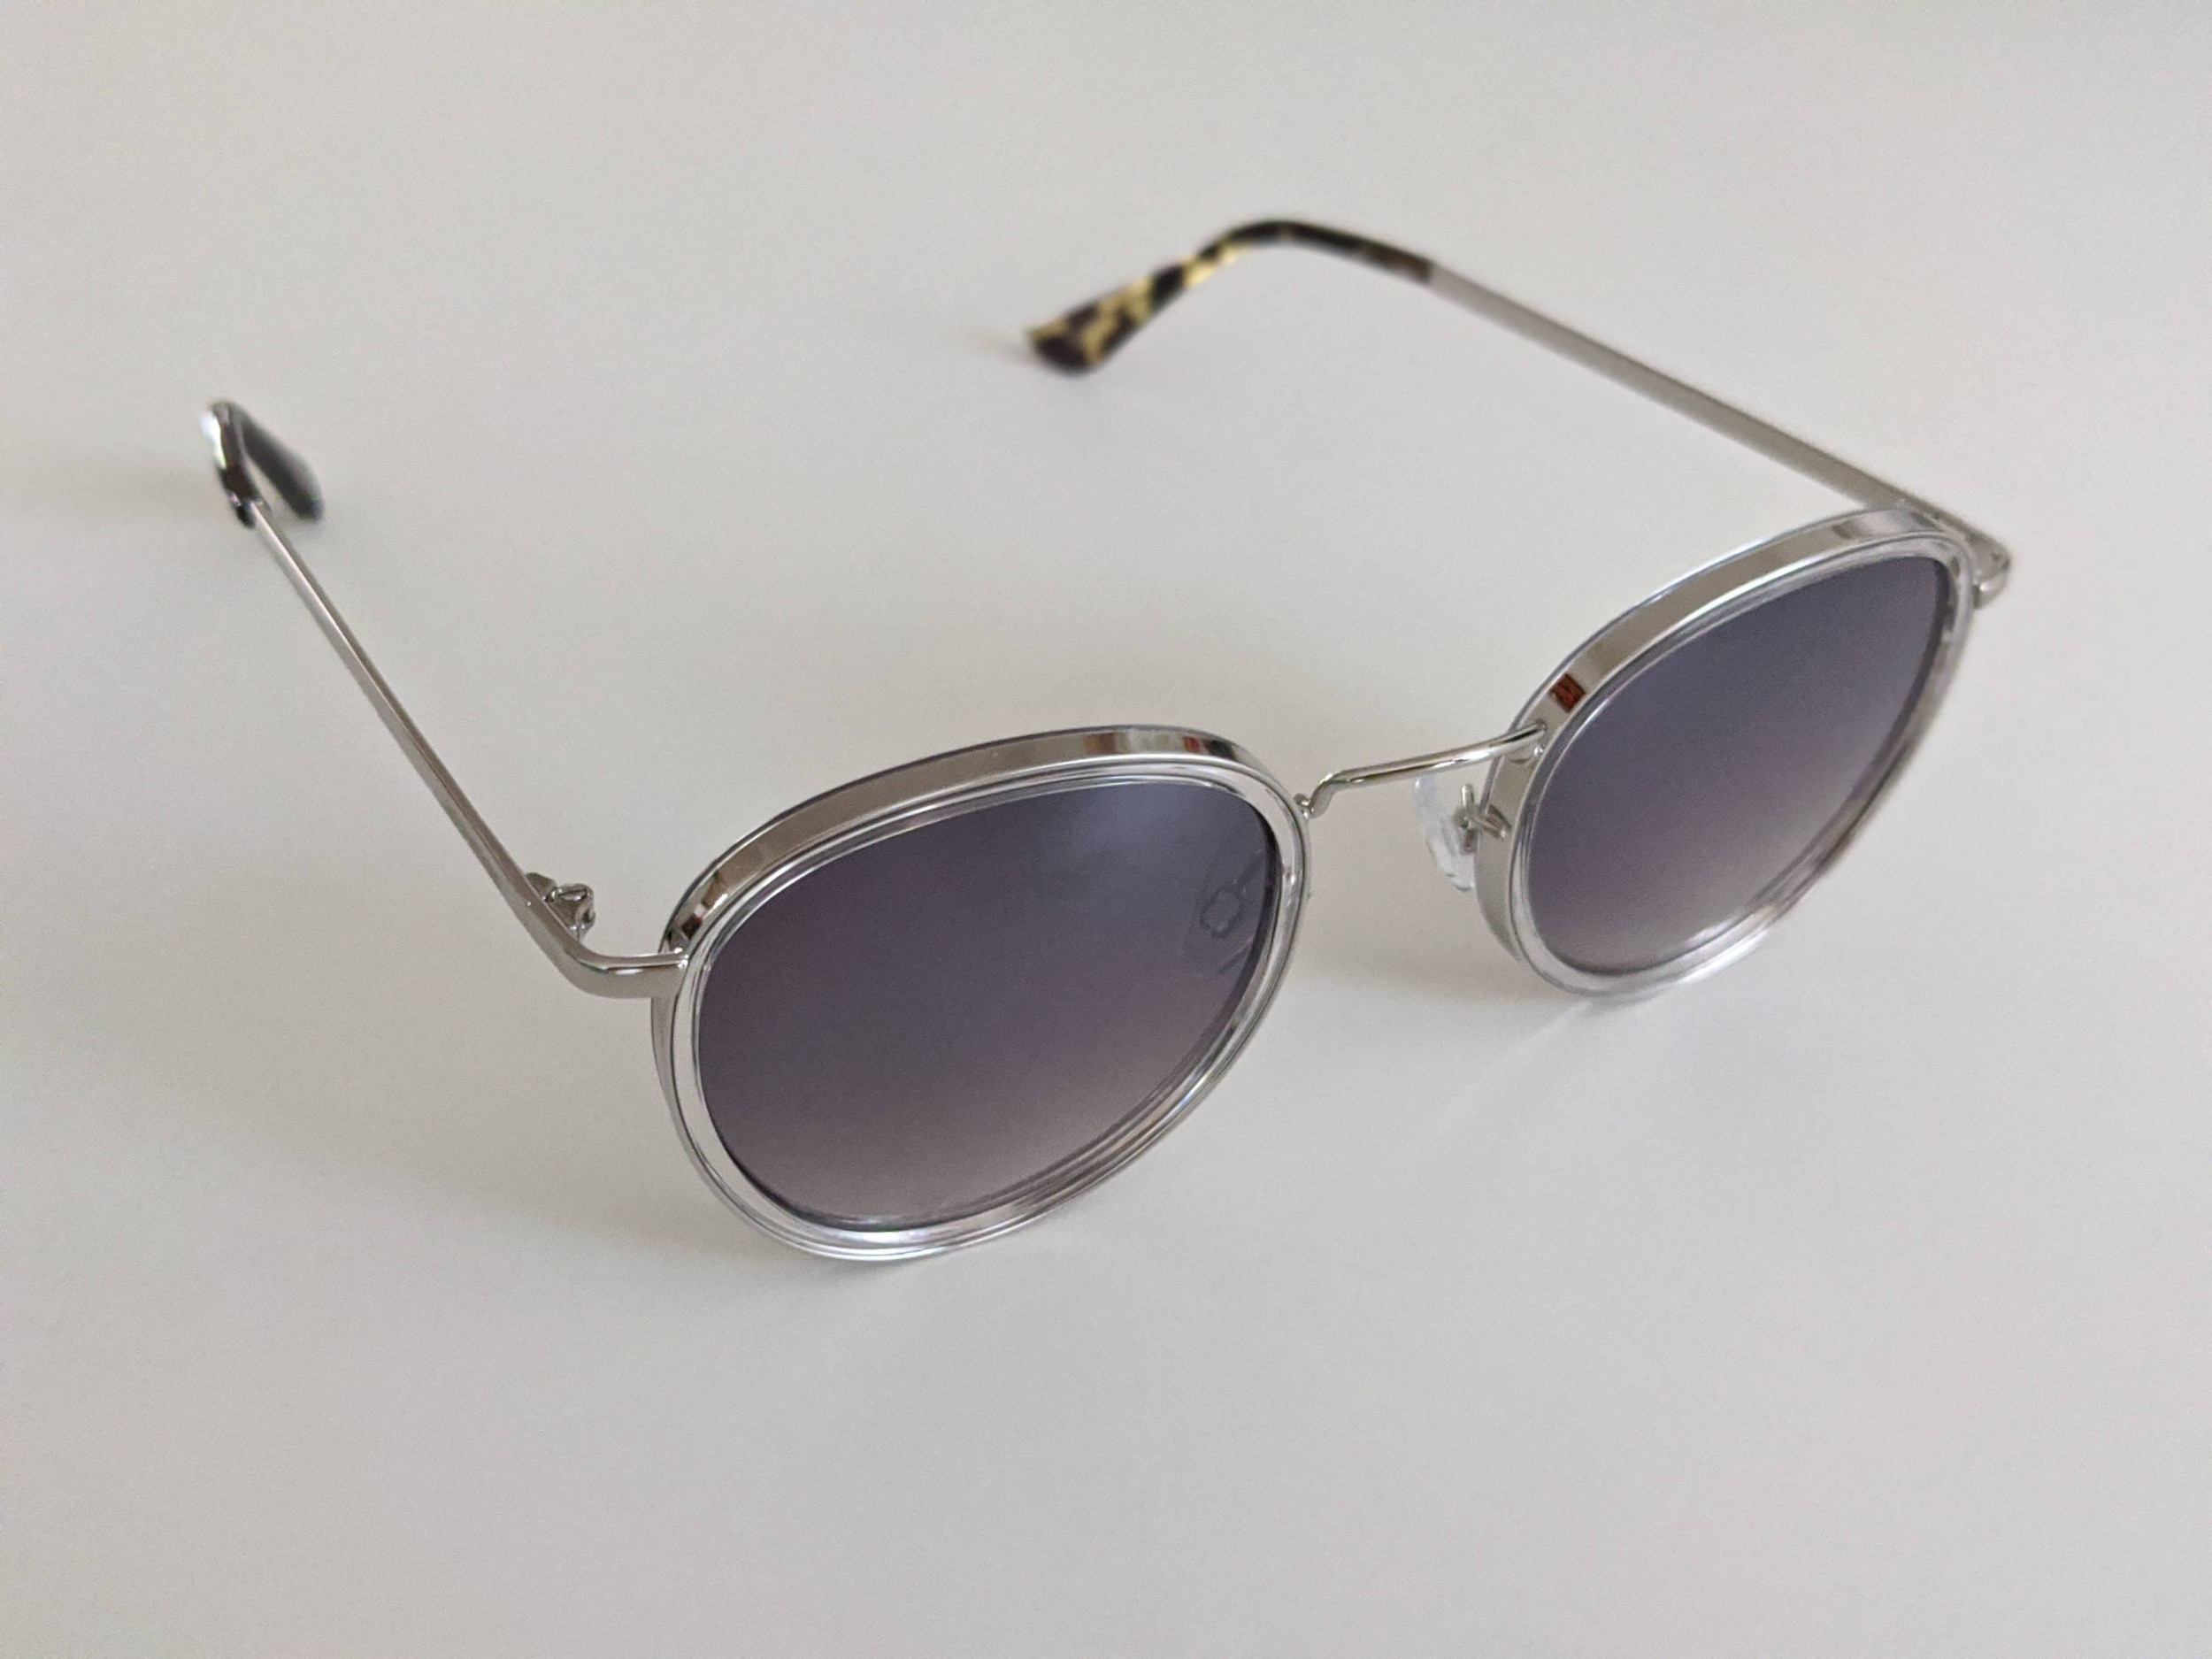 MessyWeekend Sunglasses Review: Stylish Sunglasses at Dollar-Friendly ...